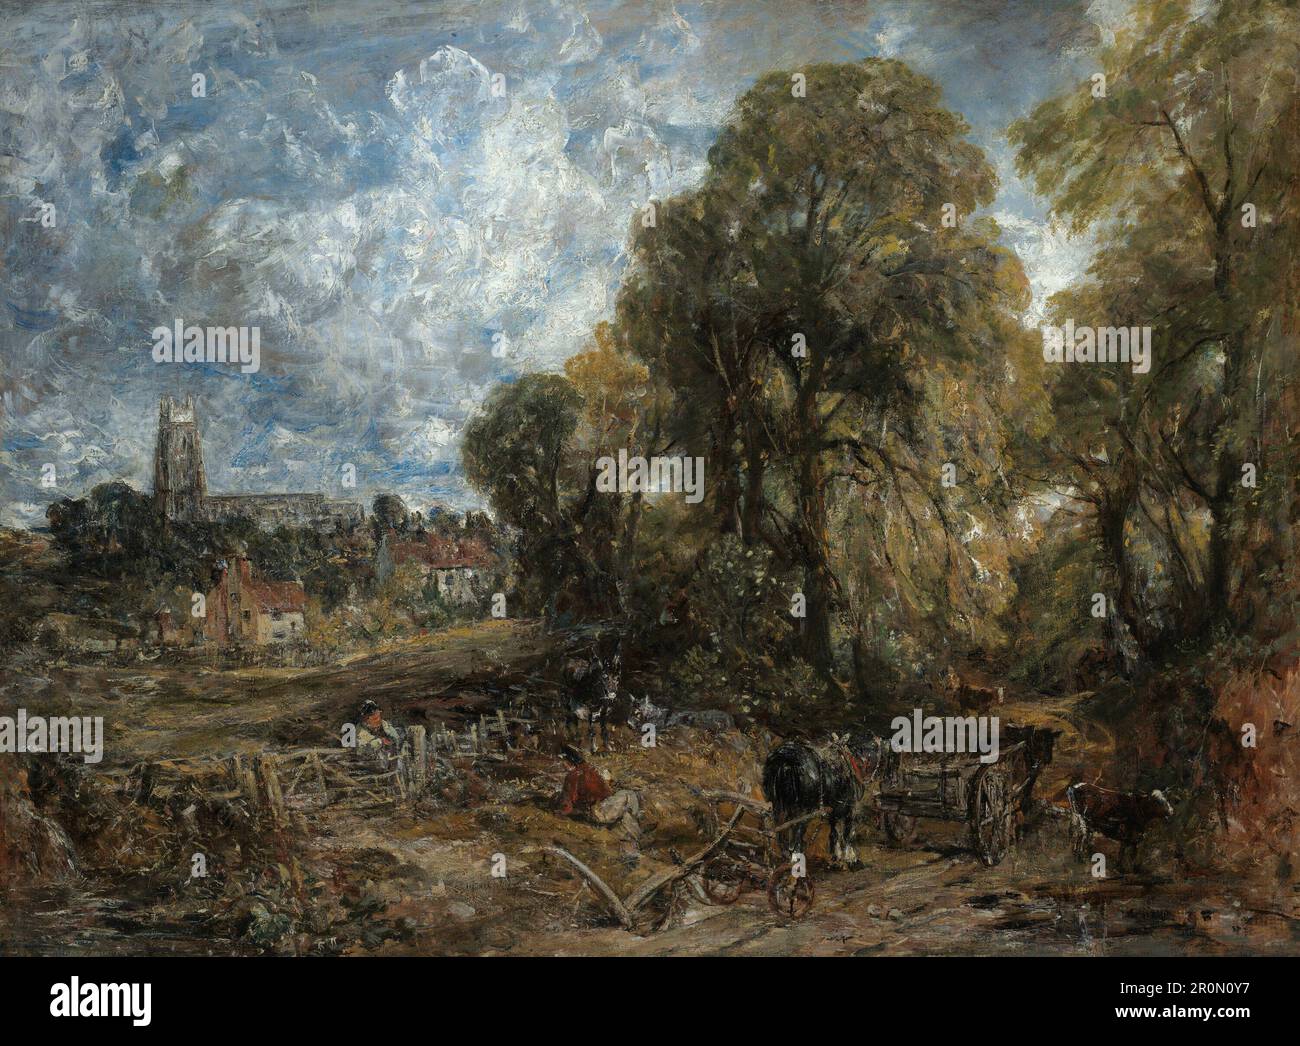 Stoke-by-Nayland Date: 1836 Artist: John Constable English, 1776-1837 Foto Stock